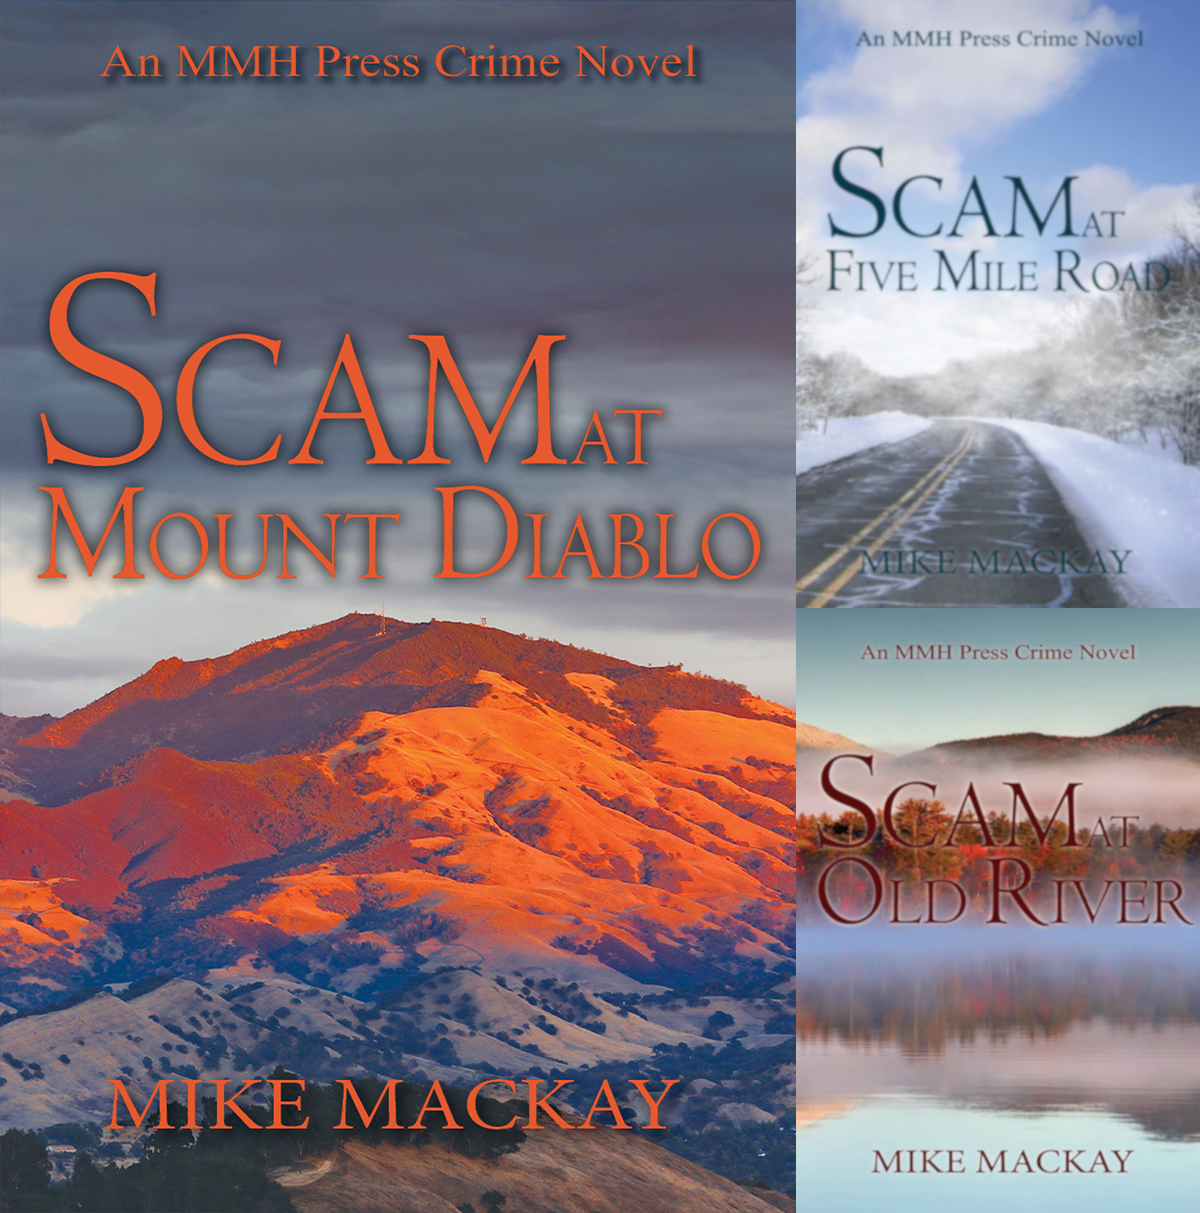 Award-winning Author Mike Mackay Explores the High-stakes World of Computer Forensics in His Latest Thriller, "Scam at Mount Diablo"